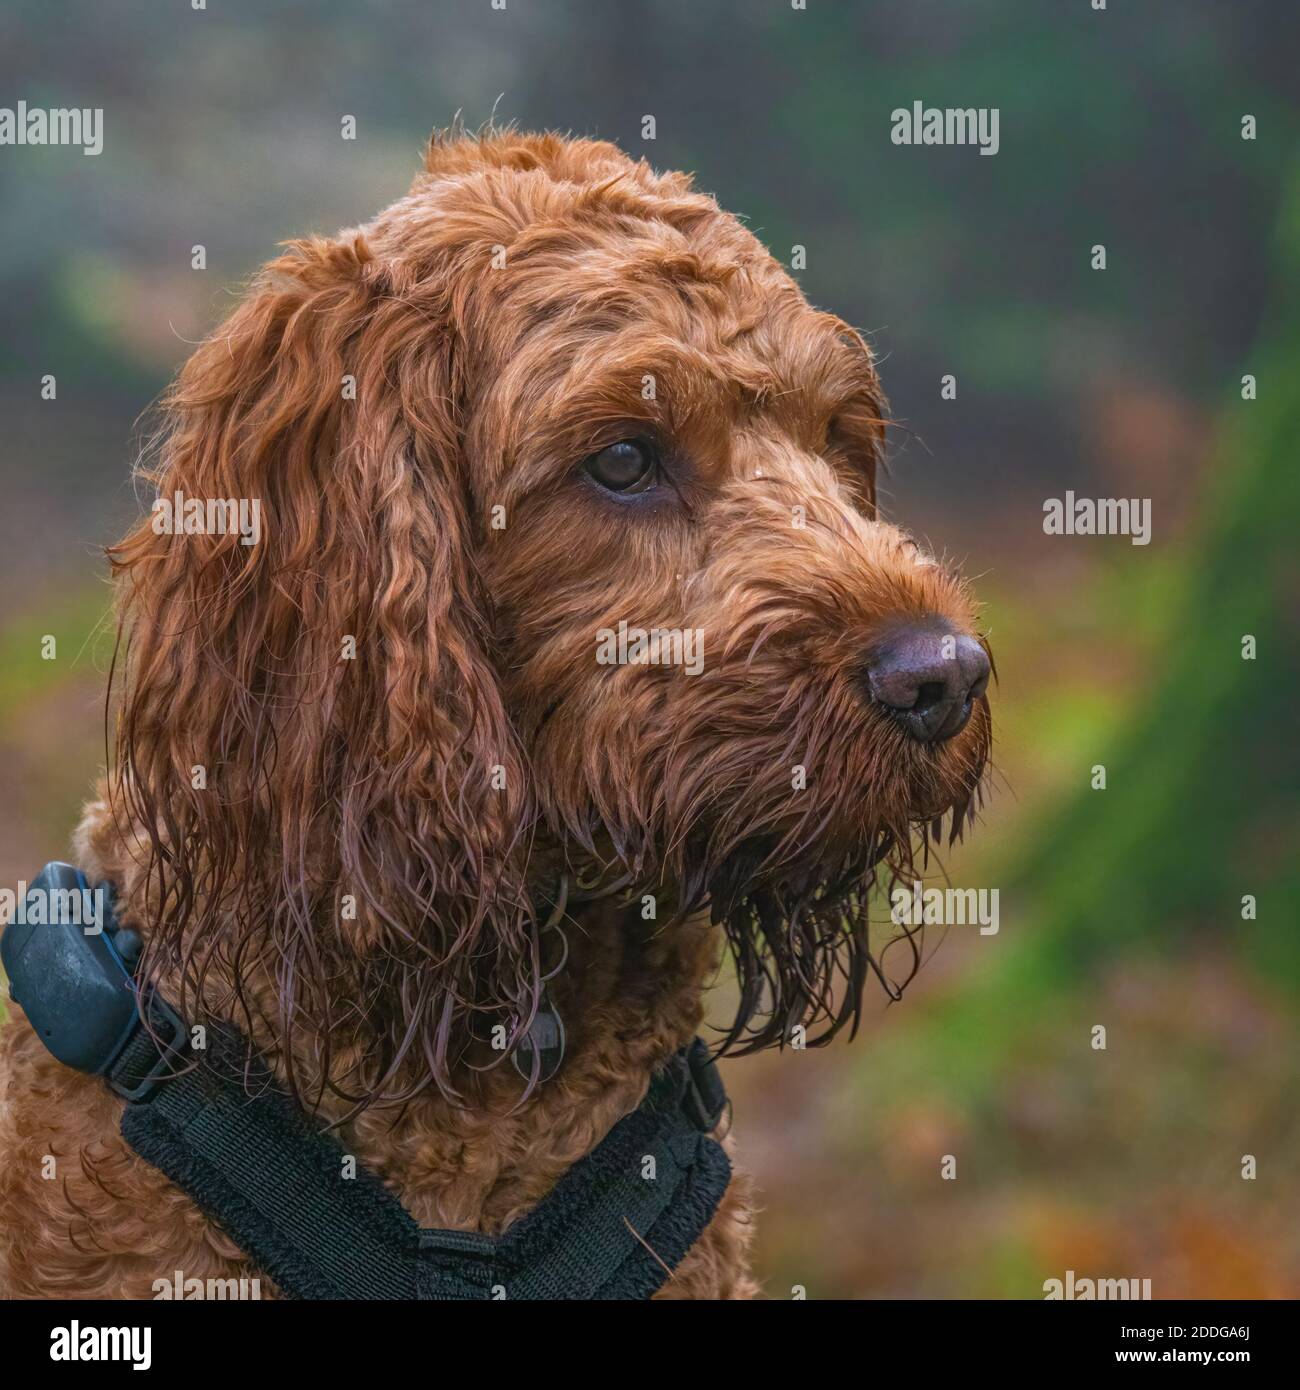 A young cockapoo dog sitting attentively in a forest Stock Photo